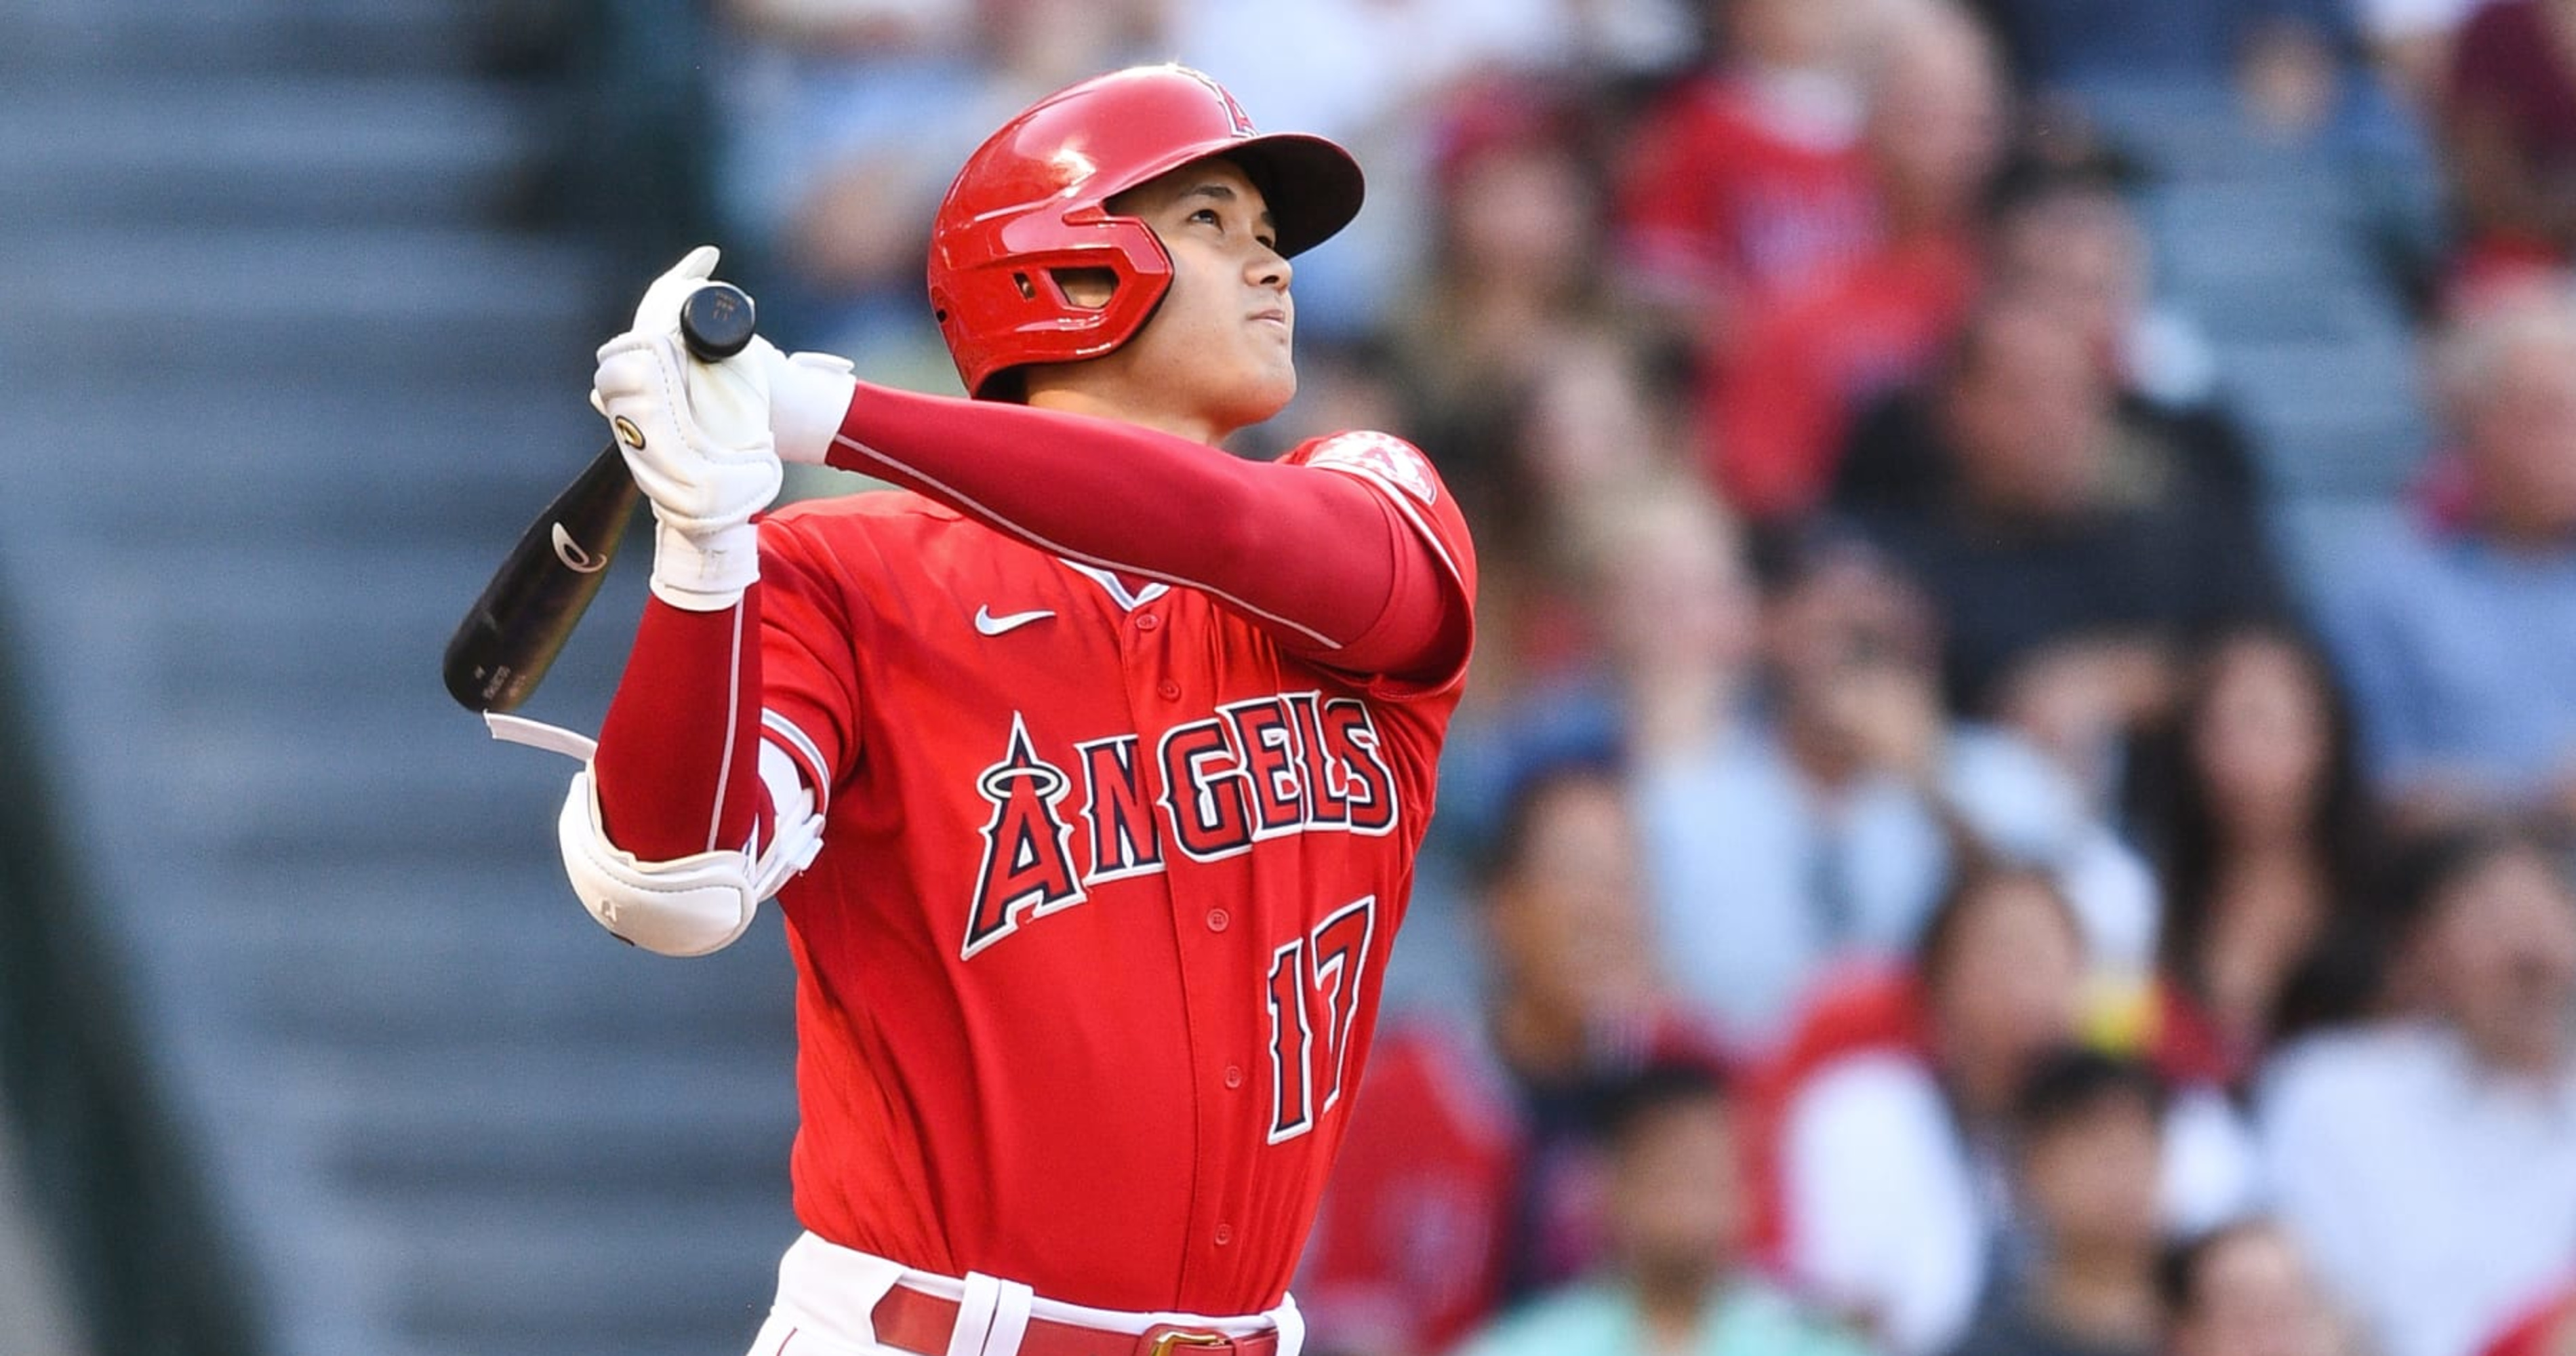 Shohei Ohtani was 'not happy' about losing 2022 AL MVP to Aaron